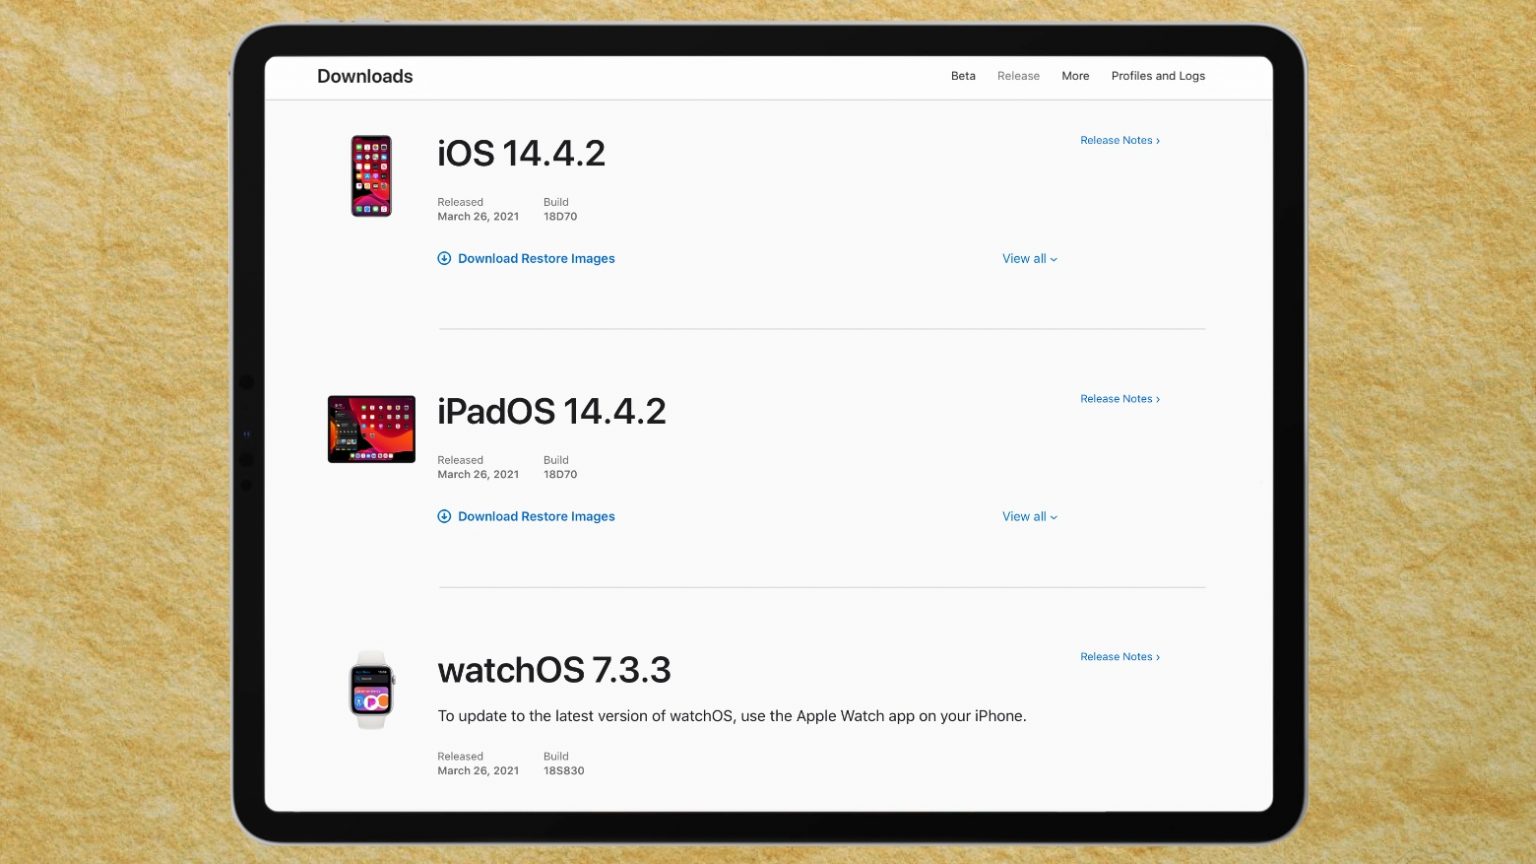 iOS 14.4.2 iPadOS 14.4.2 and watchOS 7.3.3 are all avaiulable now.